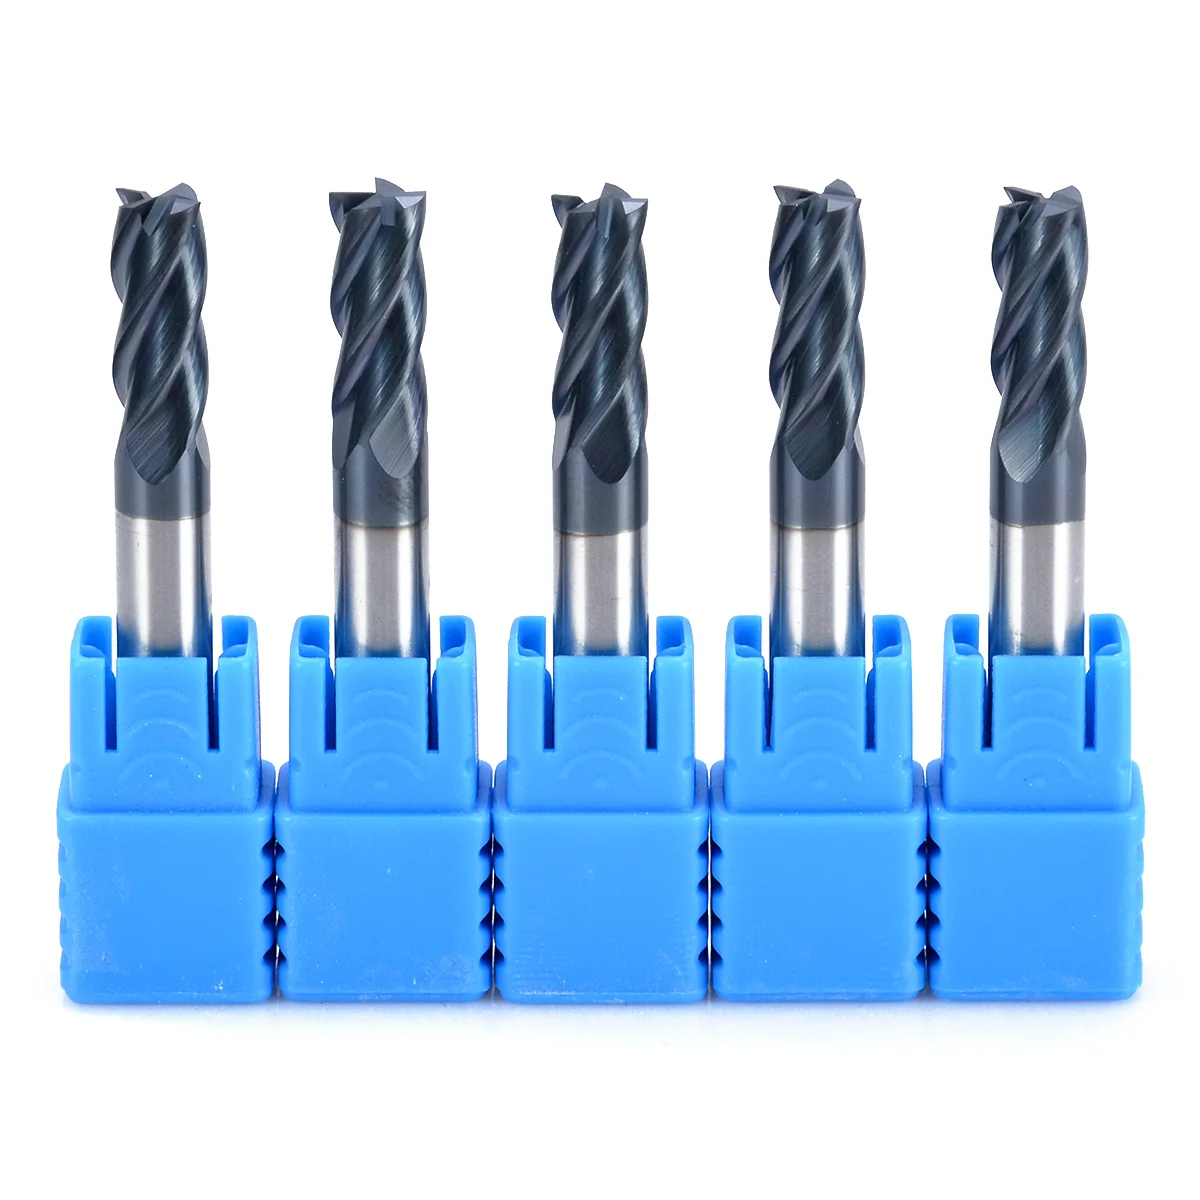 1-6MM 4 Flutes End Mill HRC50 Carbide Tungsten Milling Cutter Set CNC Tool 